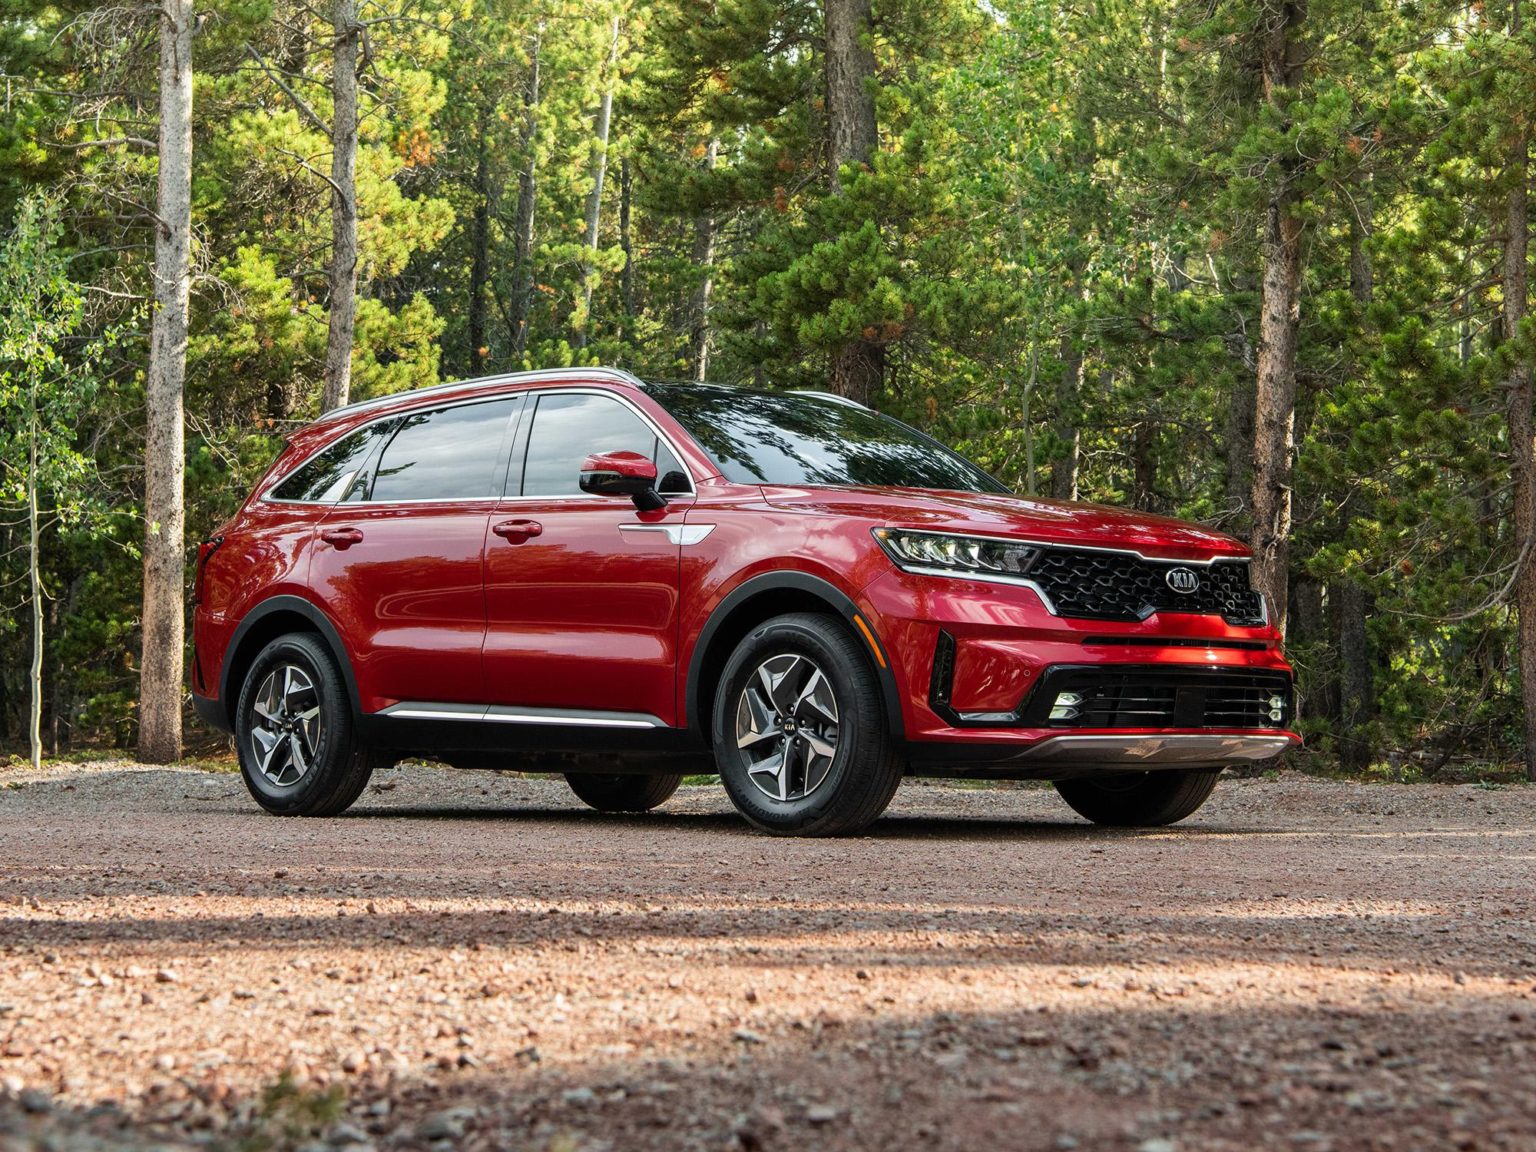 The Kia Sorento Hybrid offers a lot to like for families looking to save on fuel.